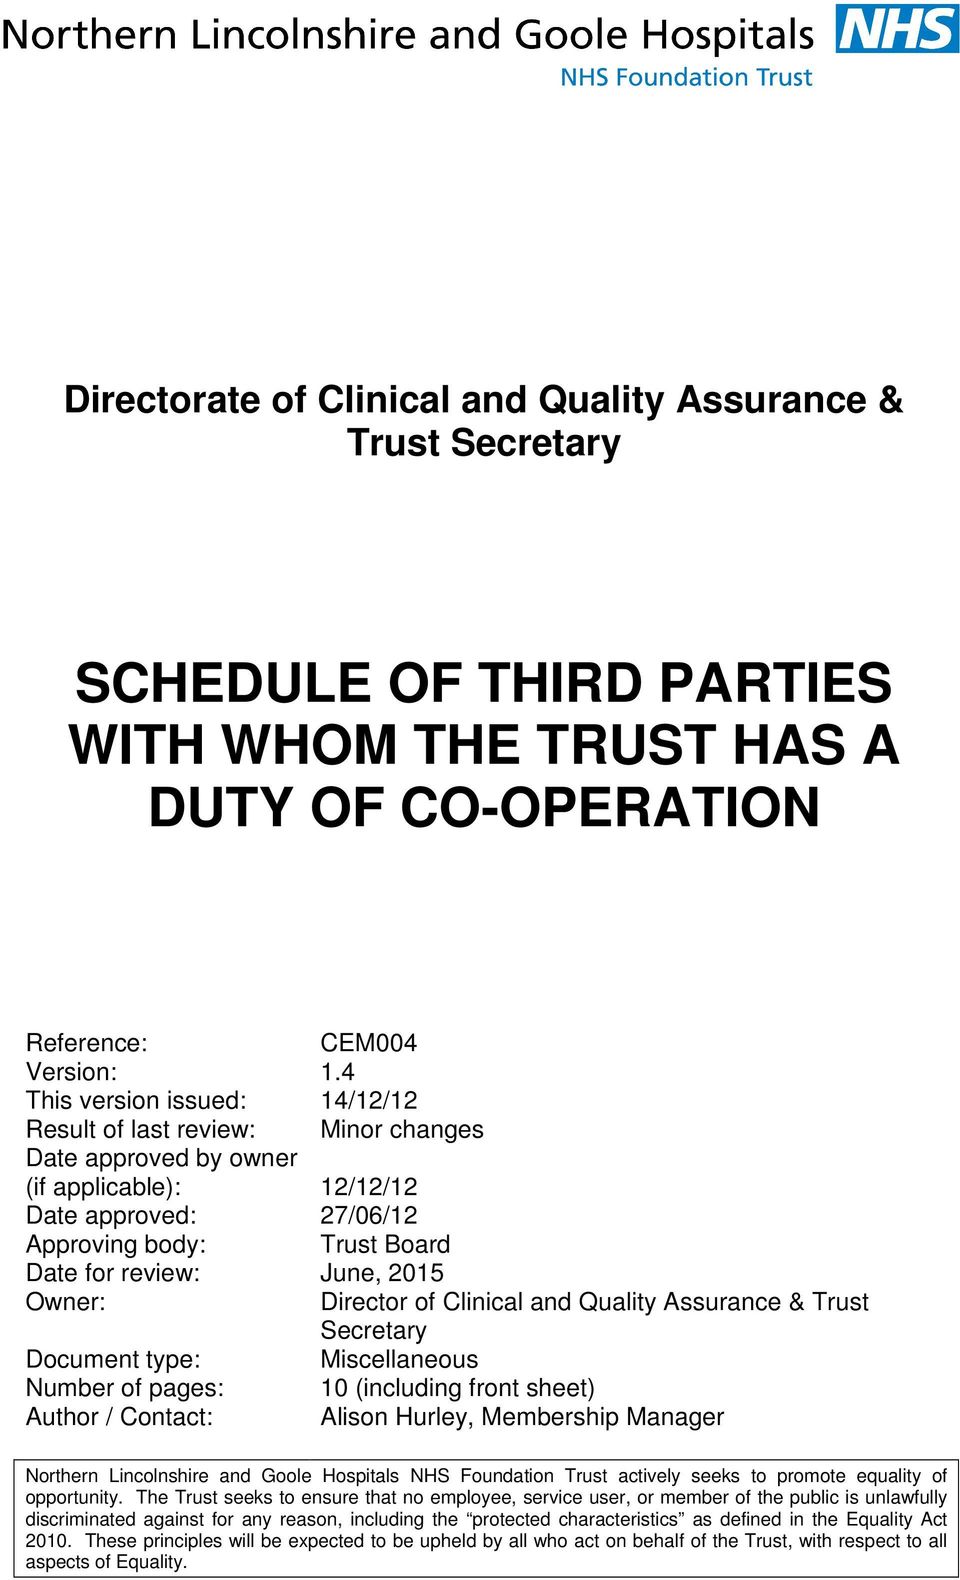 Owner: Director of Clinical and Quality Assurance & Trust Secretary Document type: Miscellaneous Number of pages: 10 (including front sheet) Author / Contact: Alison Hurley, Membership Manager